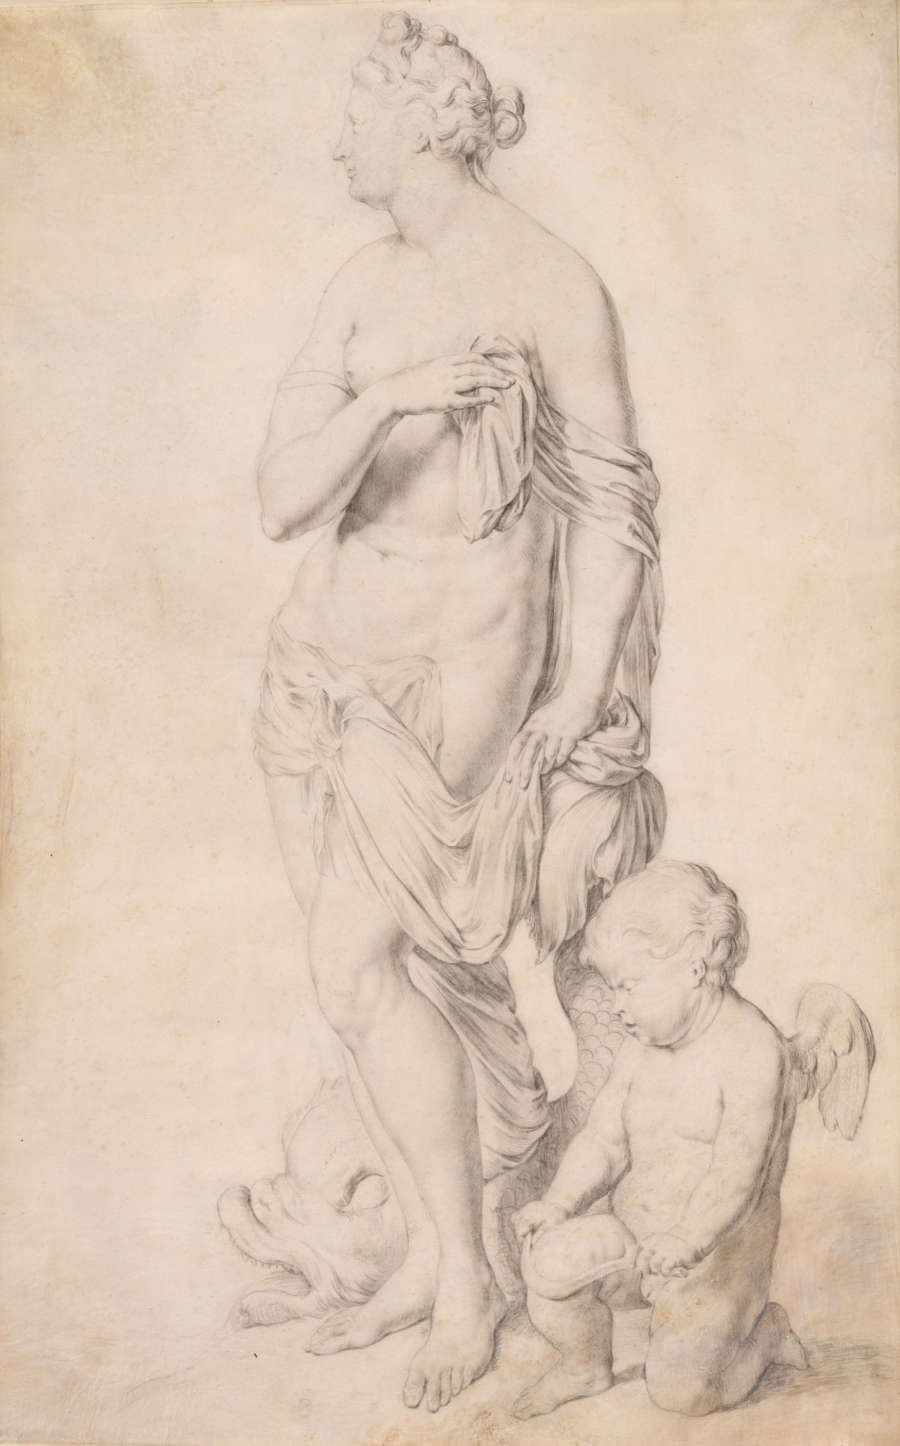 A graphite and black chalk drawing of Galatea and Cupid. The sea nymph Galatea stands gazing leftward, wearing only a sheet. Cupid kneels at her feet, stringing his bow.